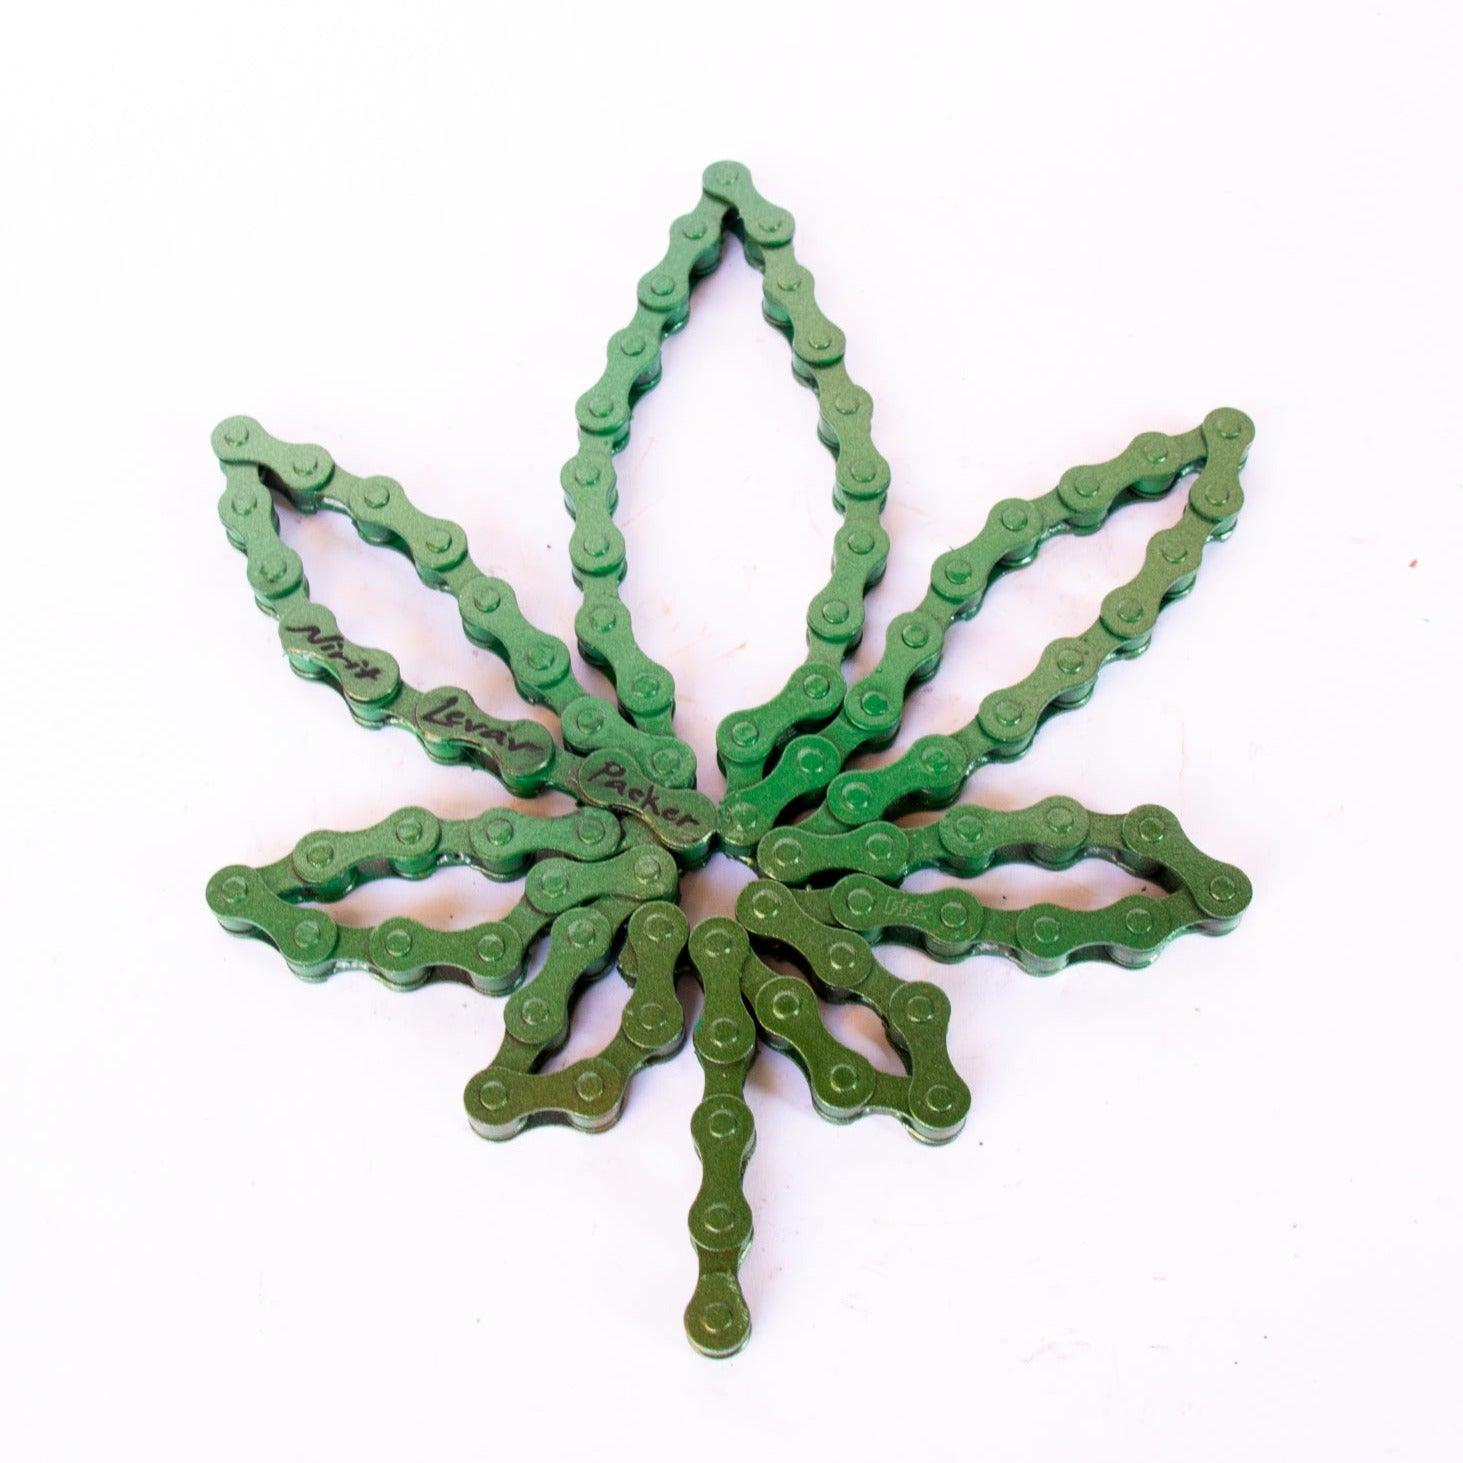 Cannabis Leaf Sculpture | UNCHAINED by NIRIT LEVAV PACKER